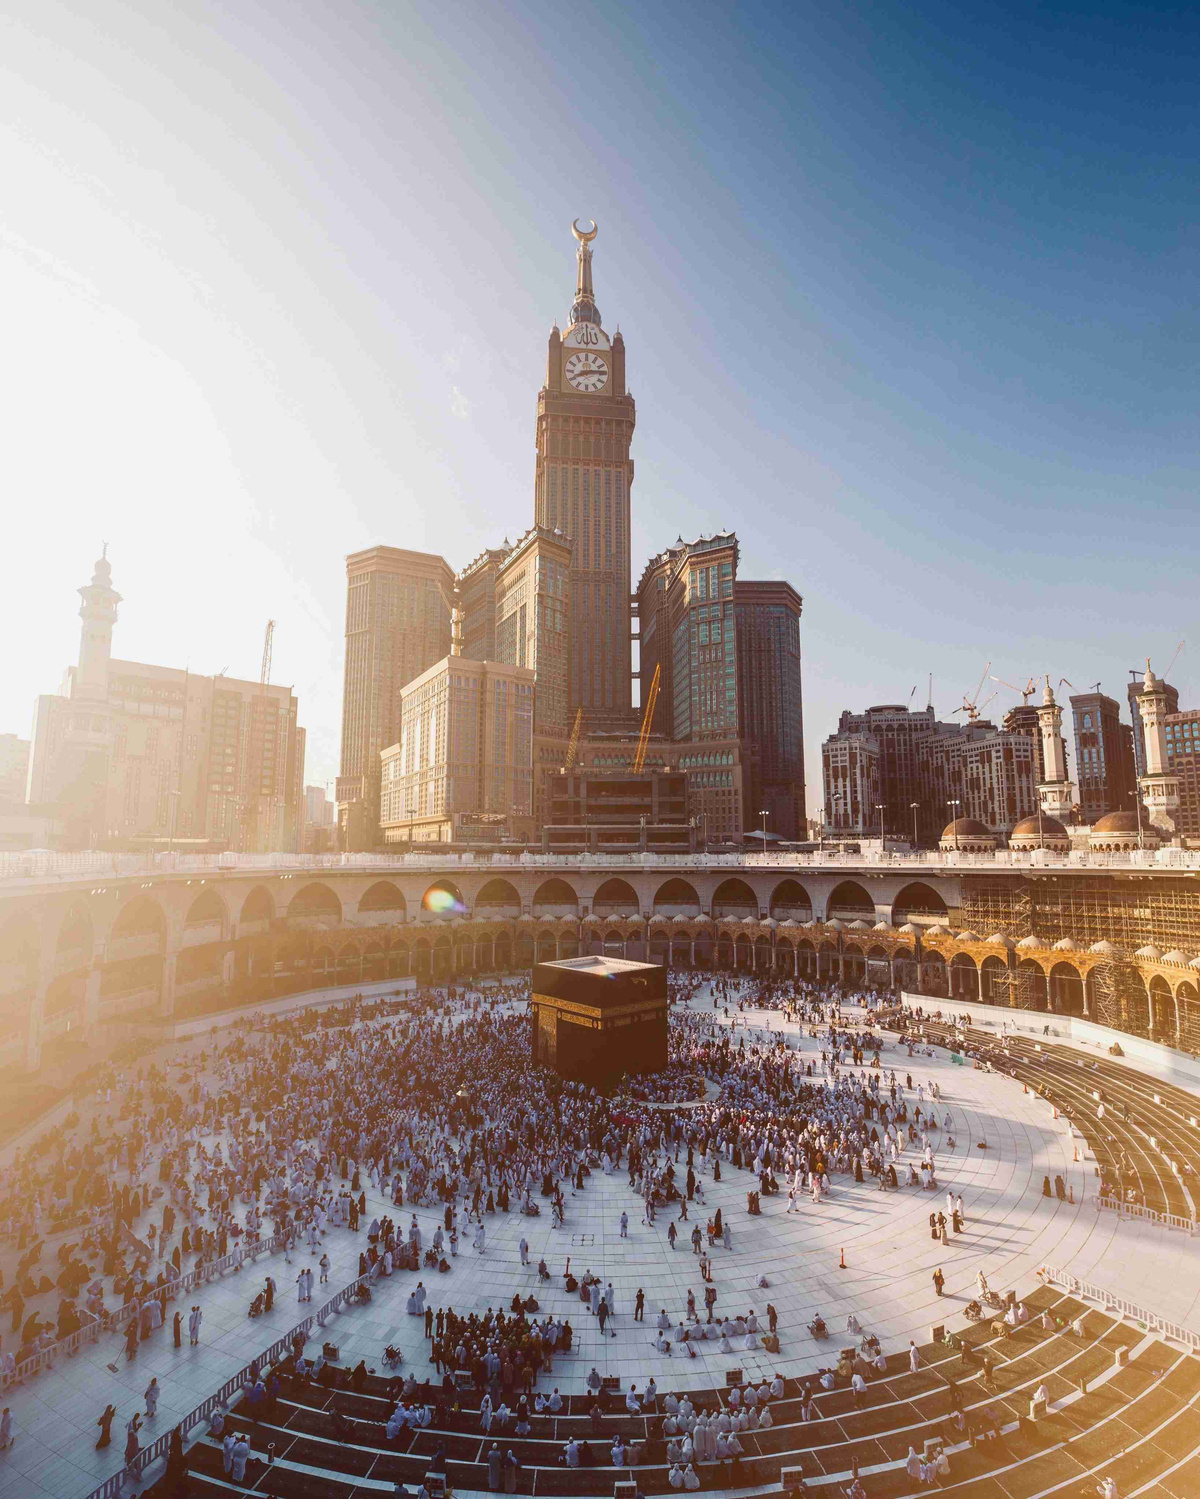 Kaaba_Mecca_with_Crowds_and_Abraj_Al_Bait_Tower_at_Sunset